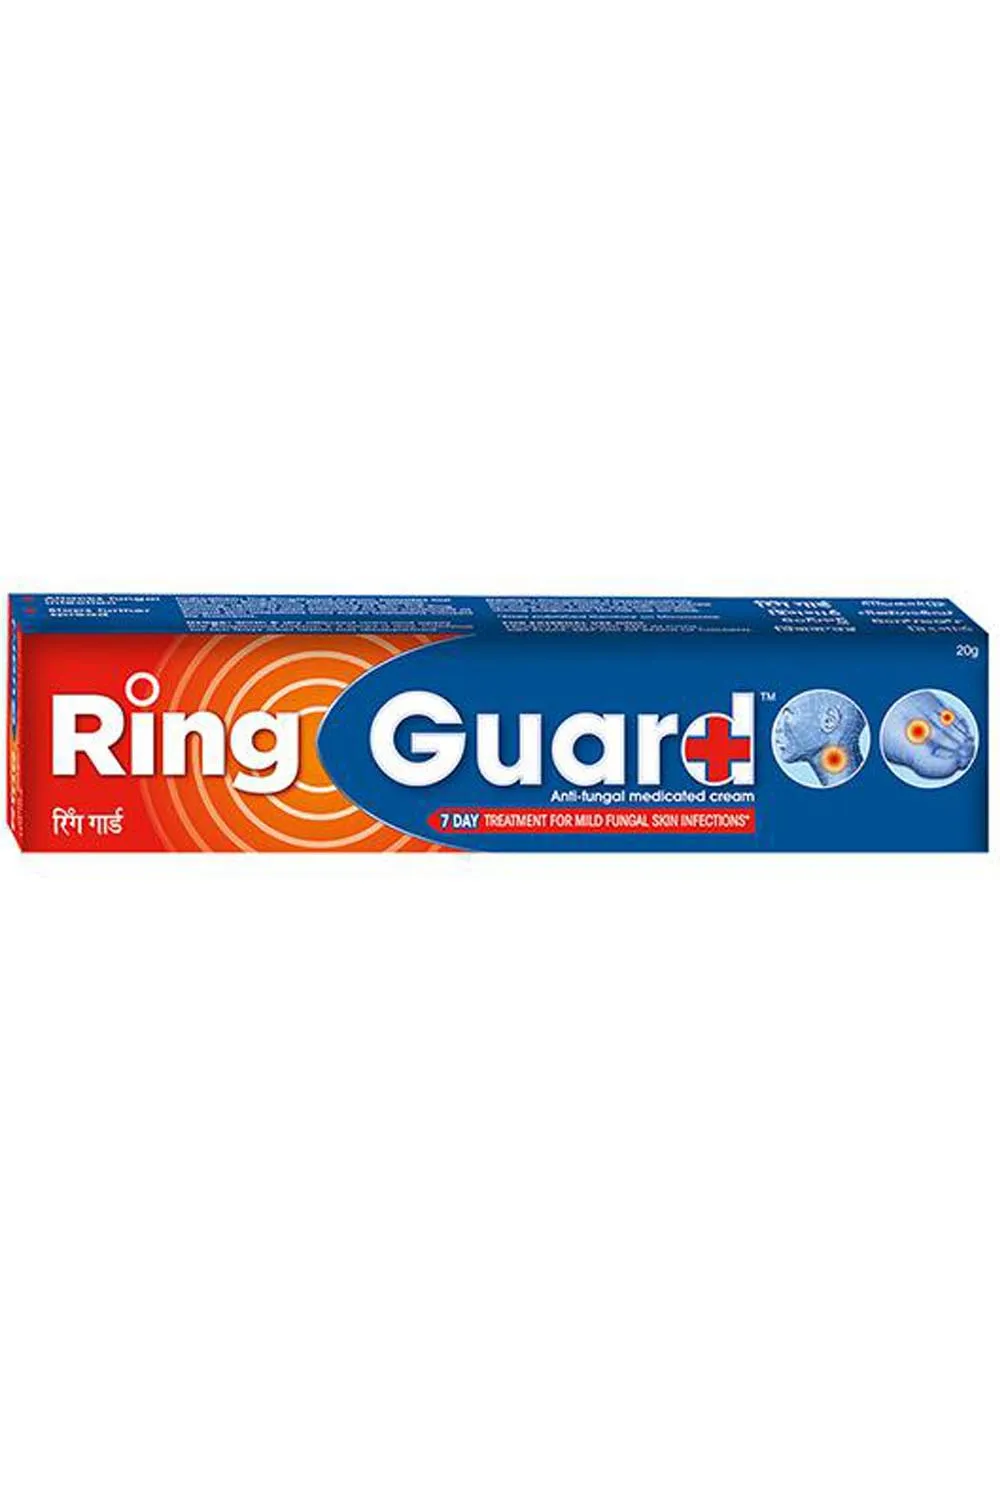 Details more than 71 ring guard cream review latest - vova.edu.vn